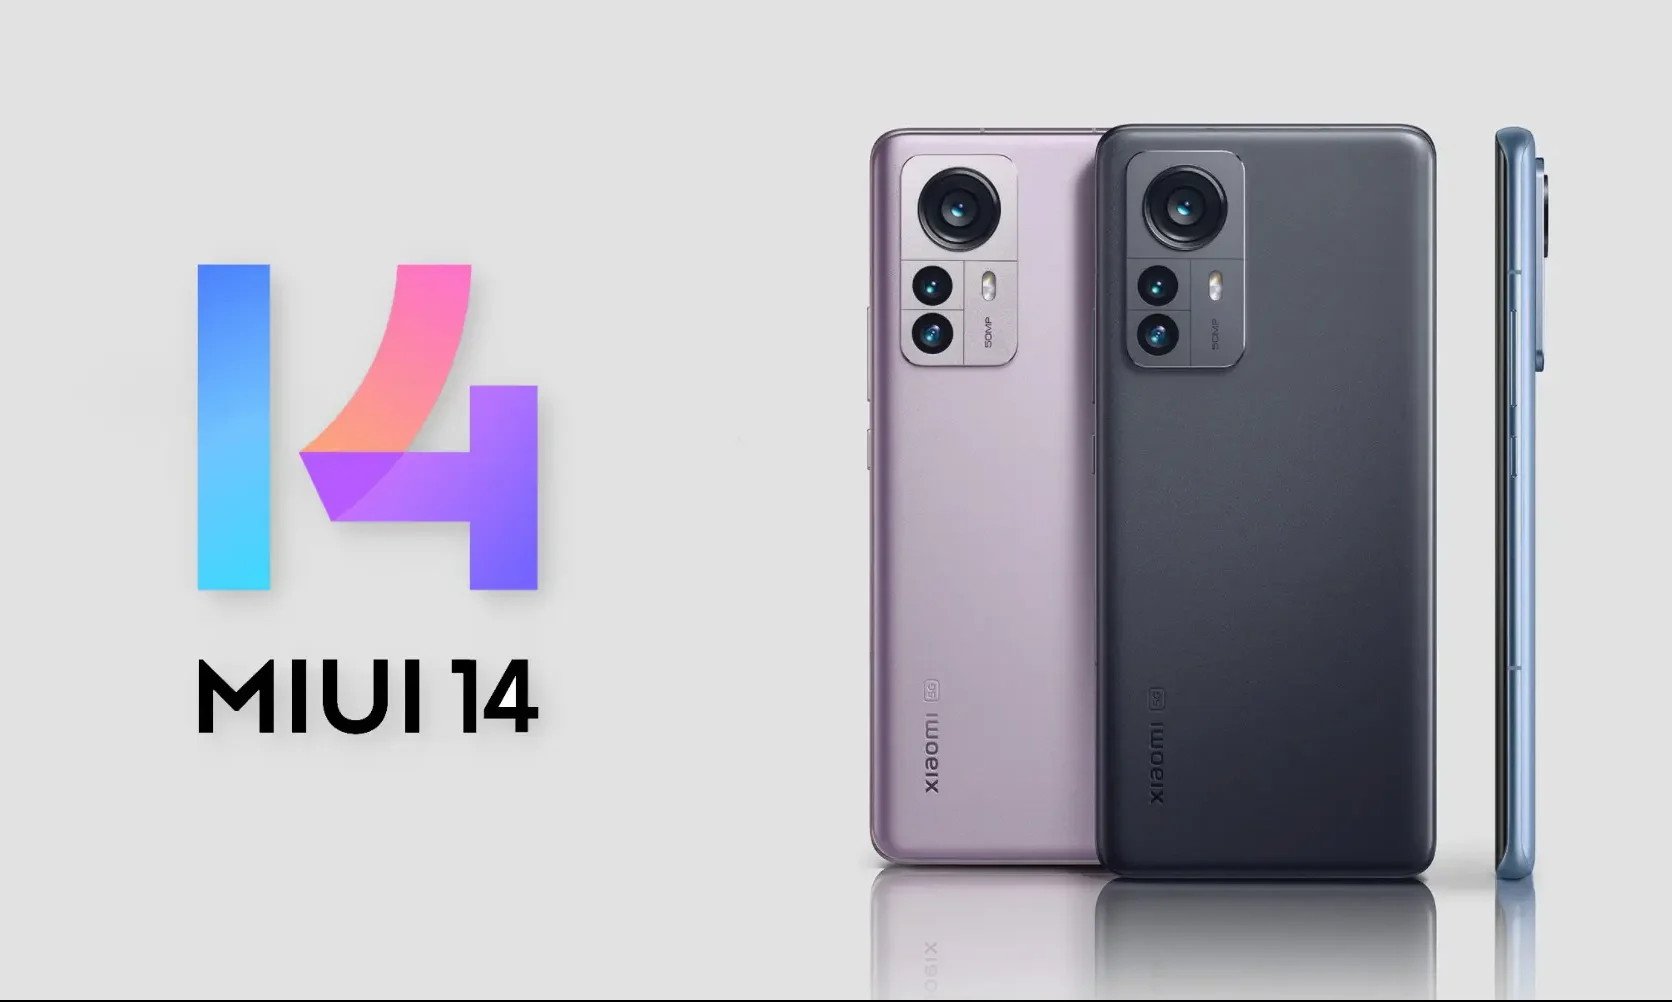 Xiaomi 12T Pro Receives MIUI 14 Based on Android 13